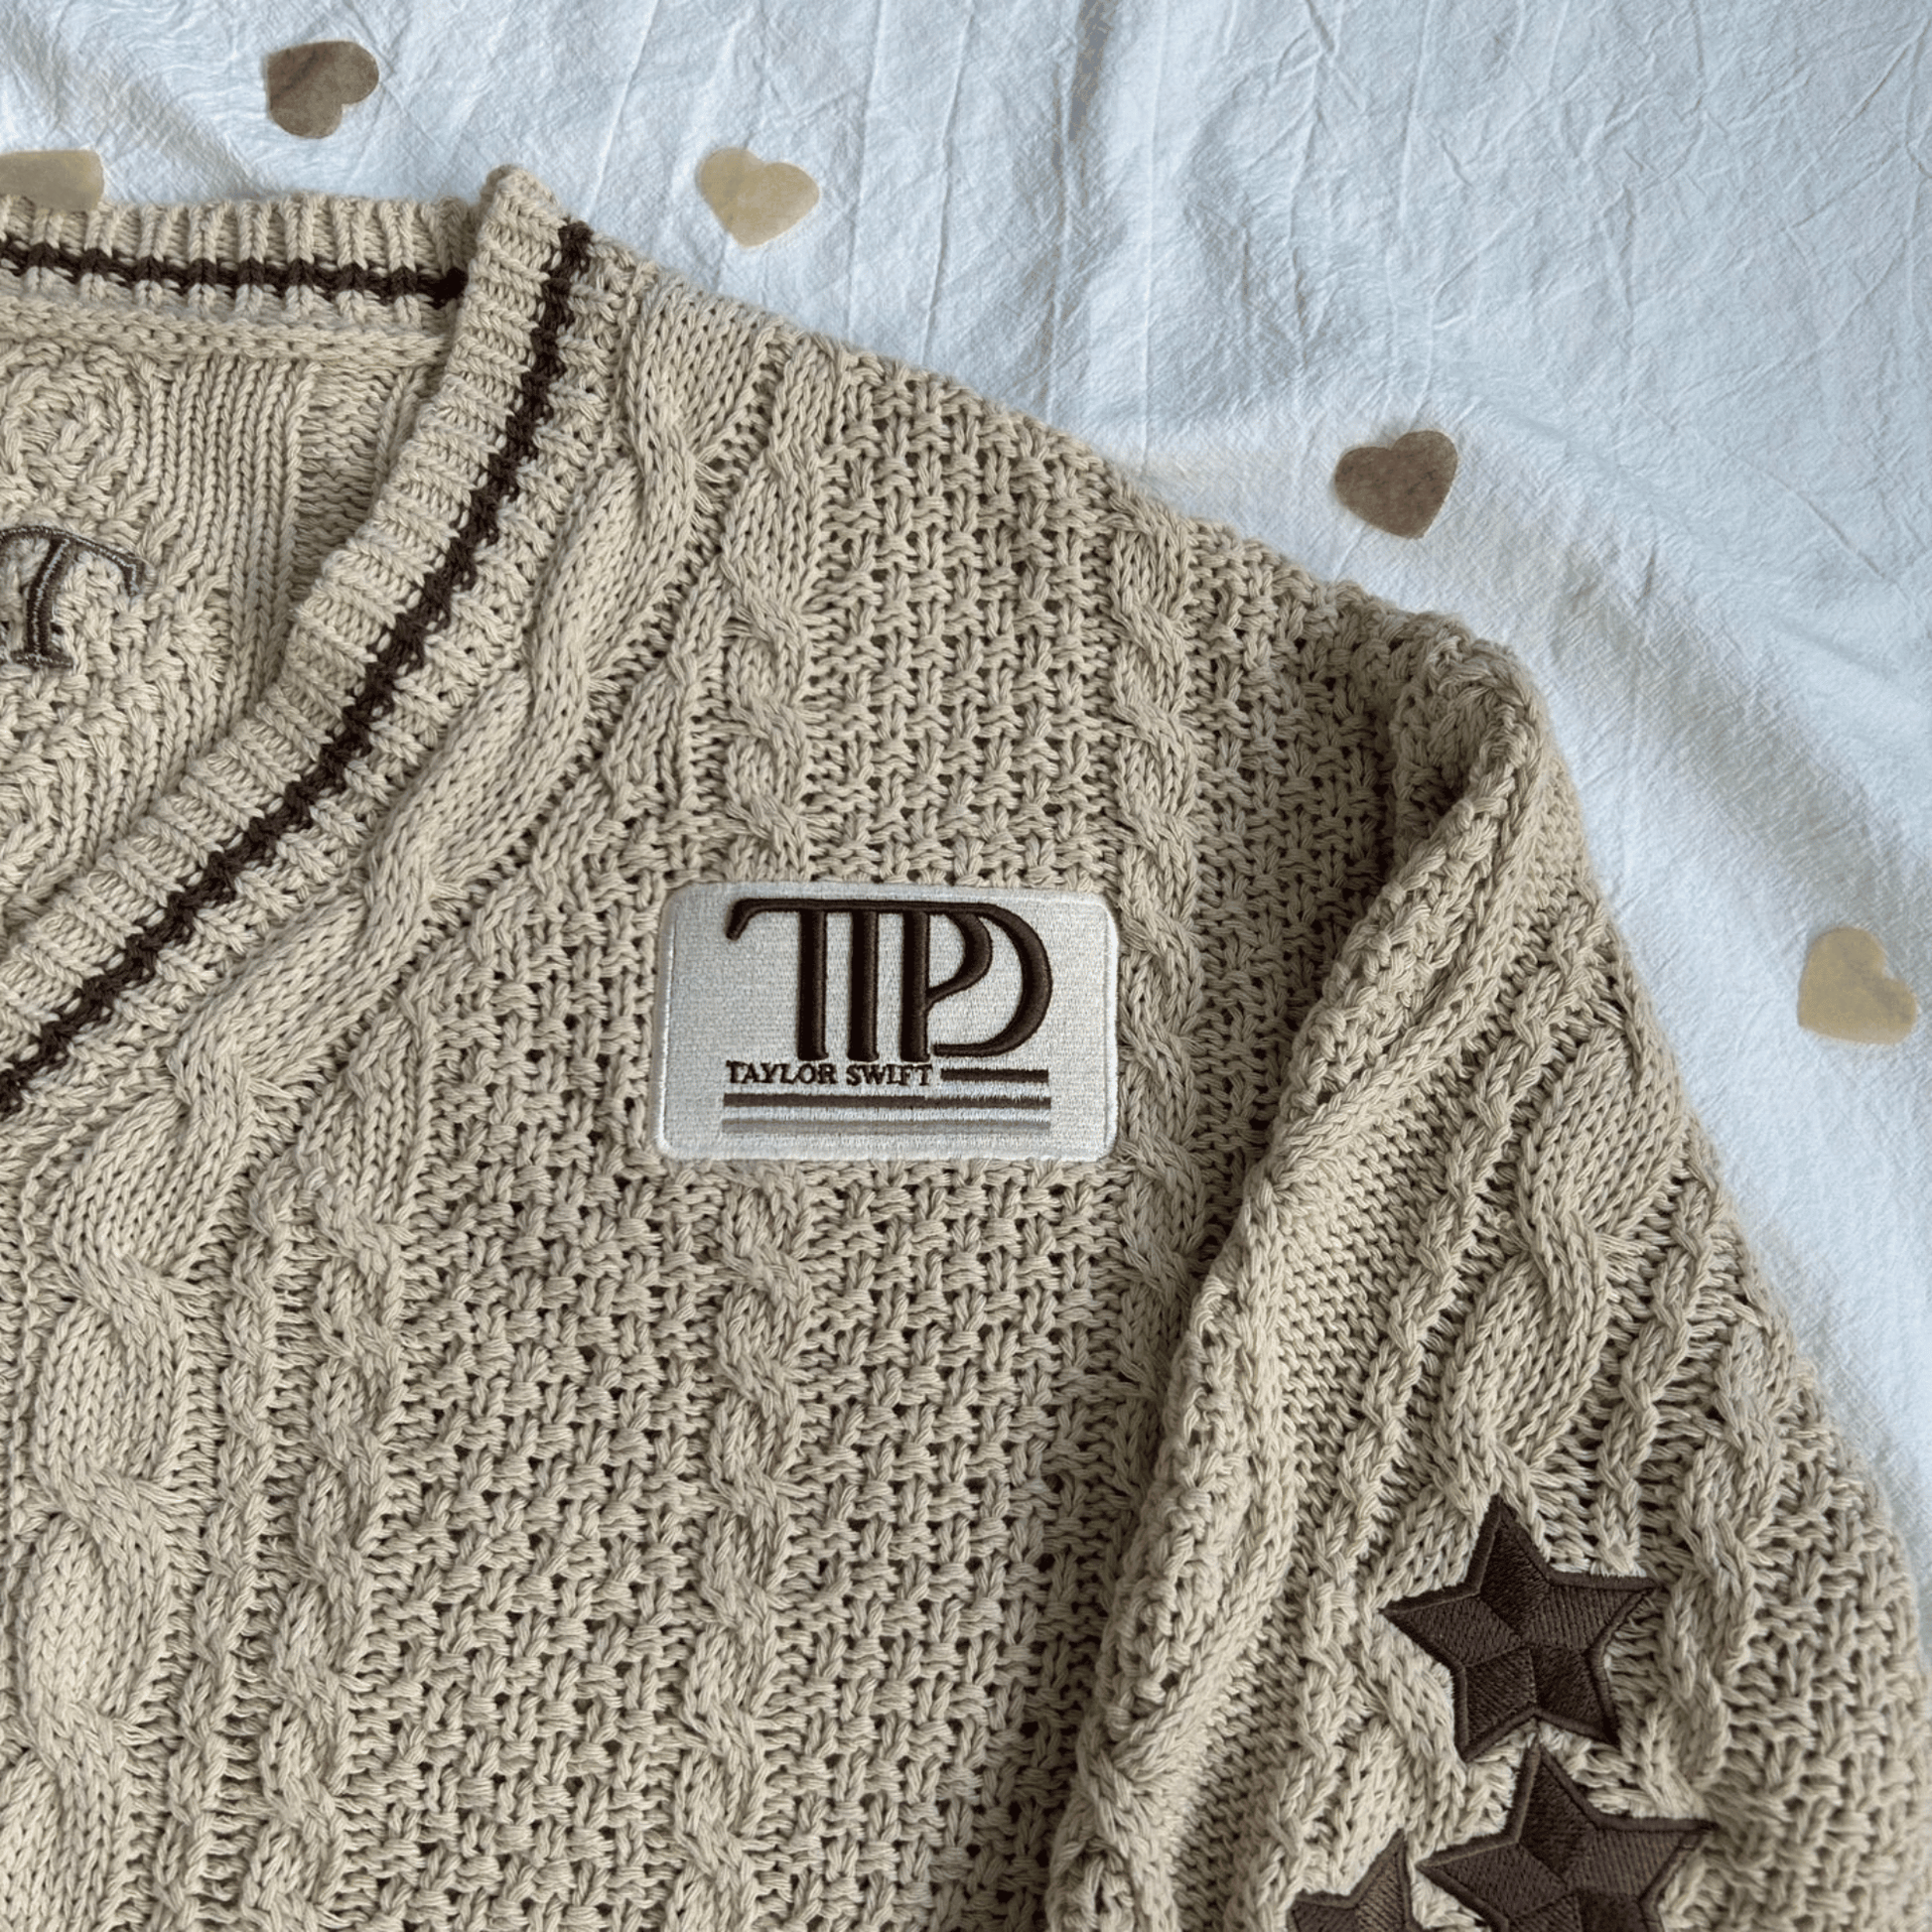 Tortured Poets Department Cardigan with Taylor Swift patch